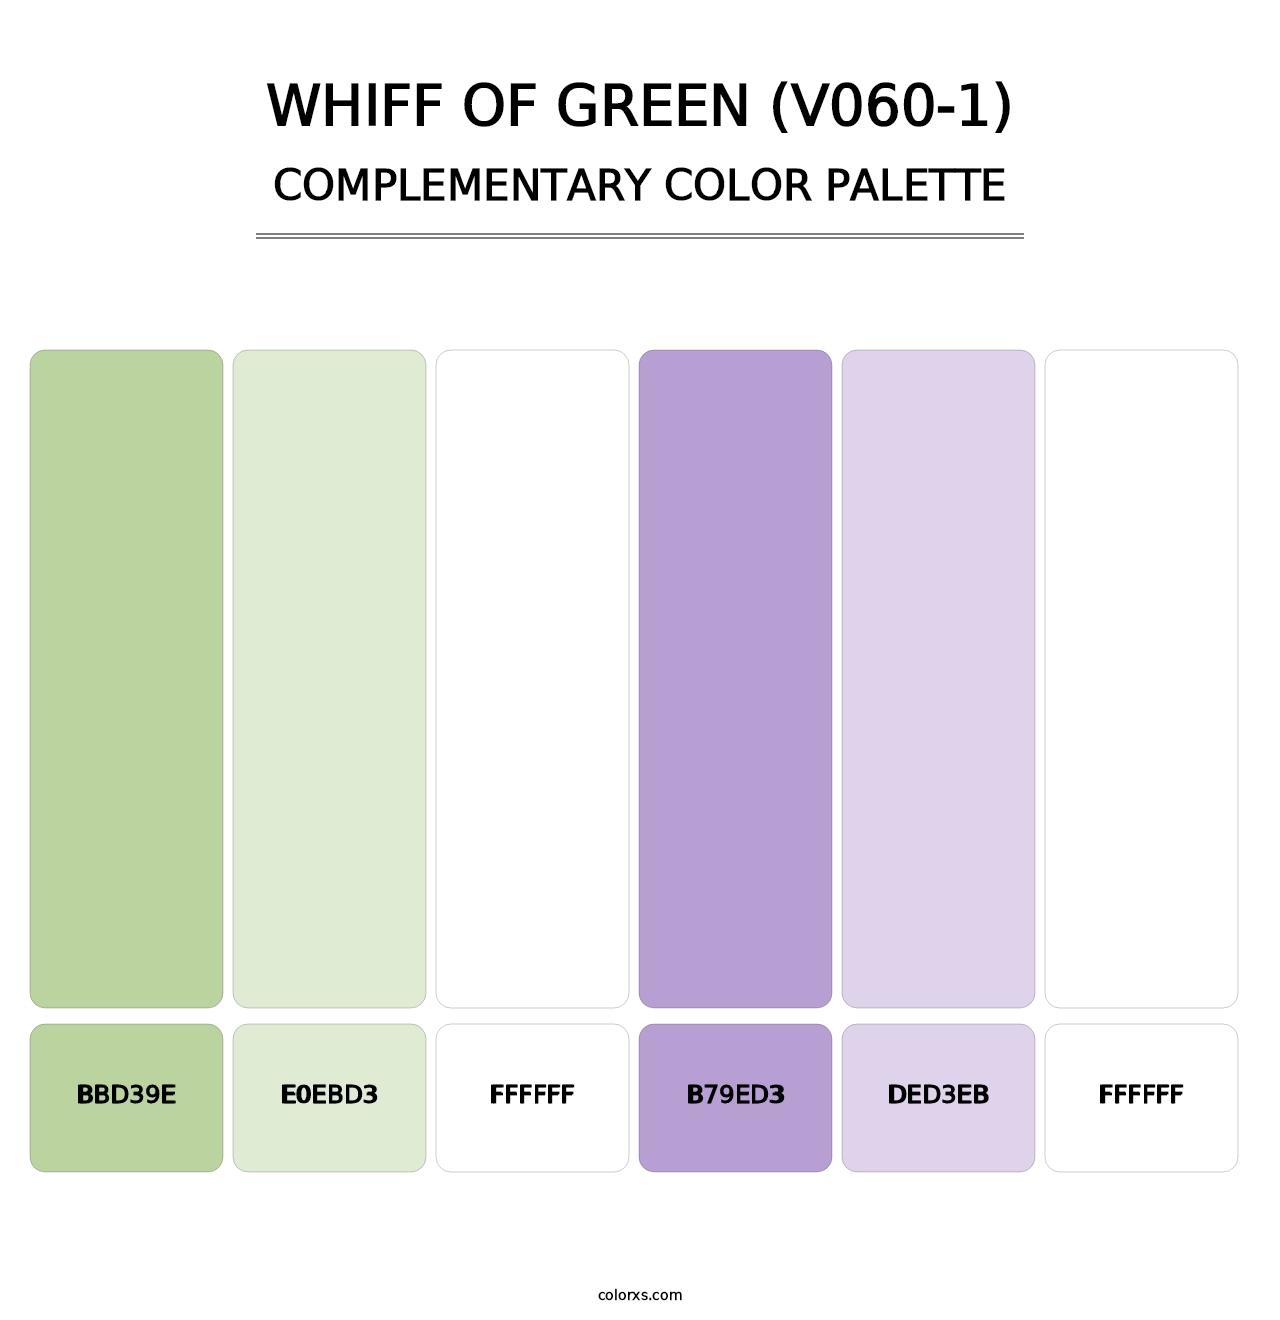 Whiff of Green (V060-1) - Complementary Color Palette